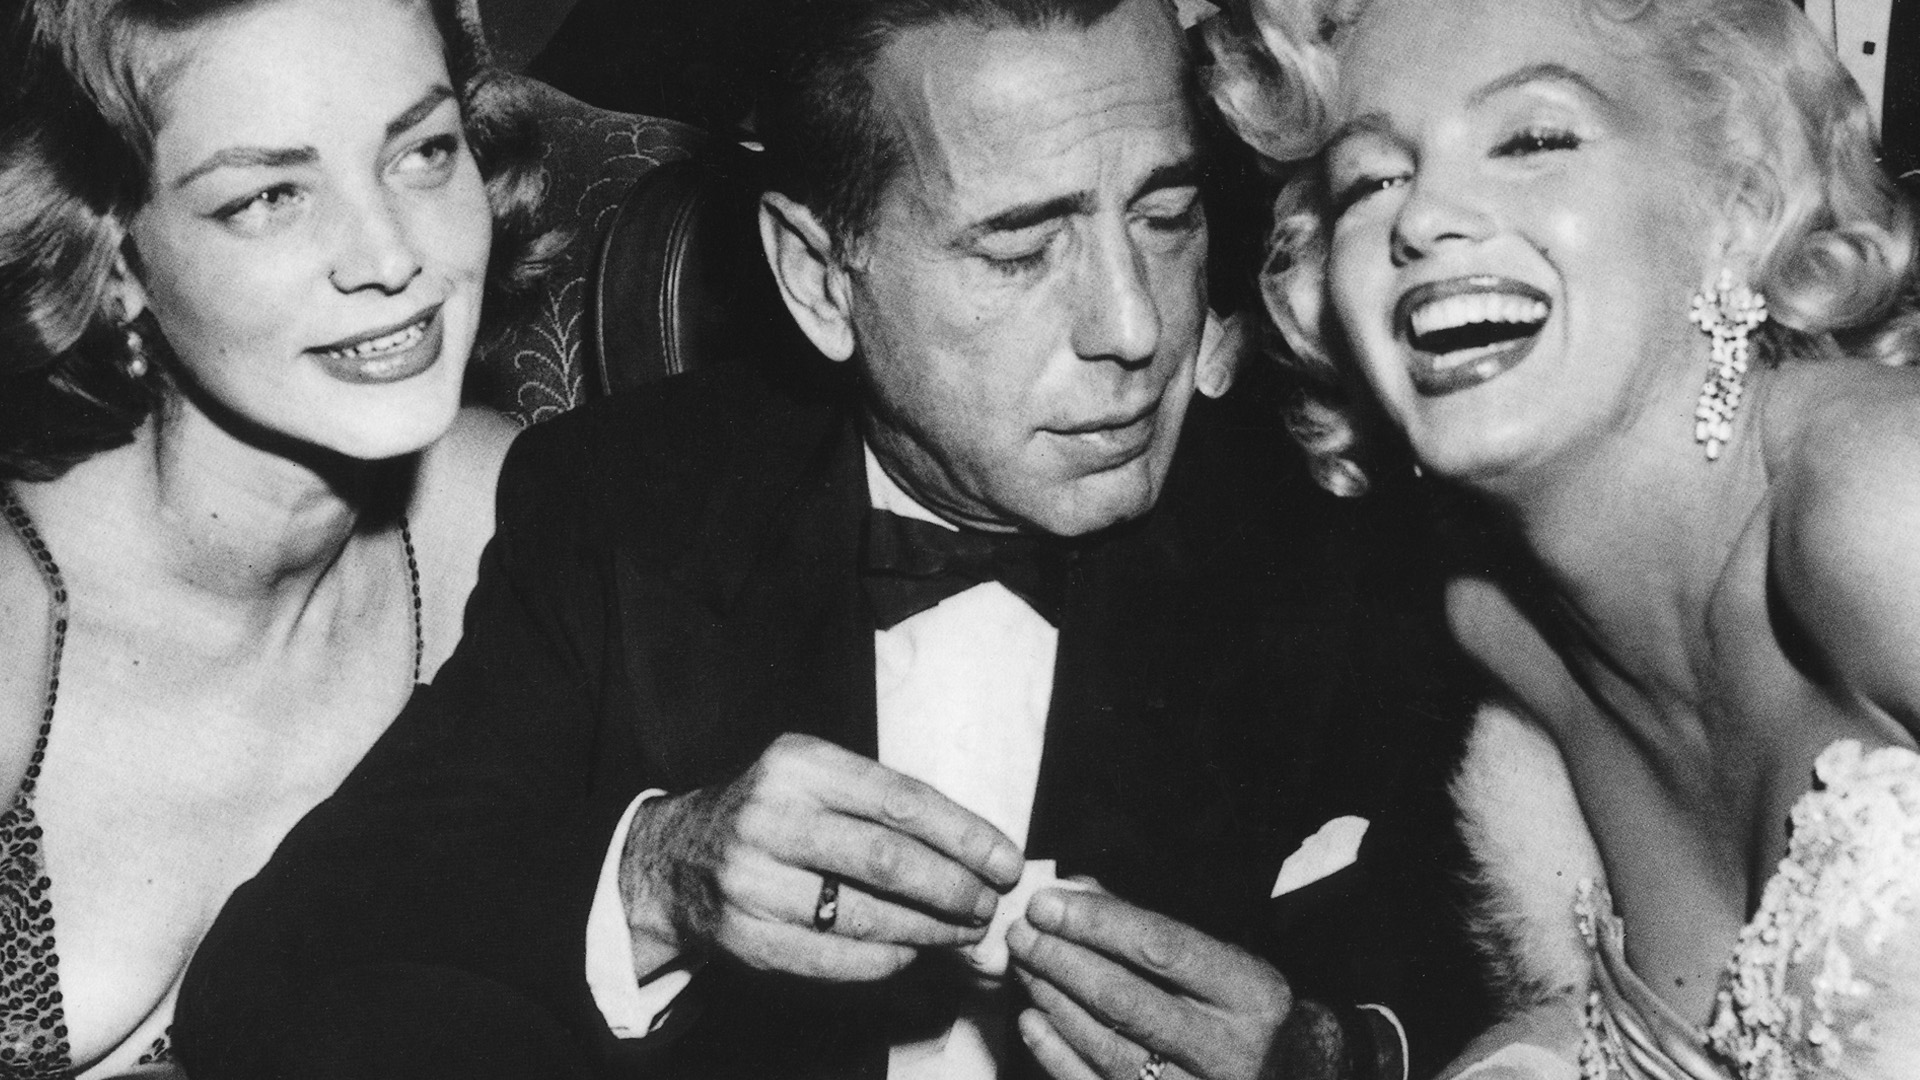 Lauren Bacall, Humphrey Bogart, and Marilyn Monroe, sitting together, exuding classic Hollywood charm.